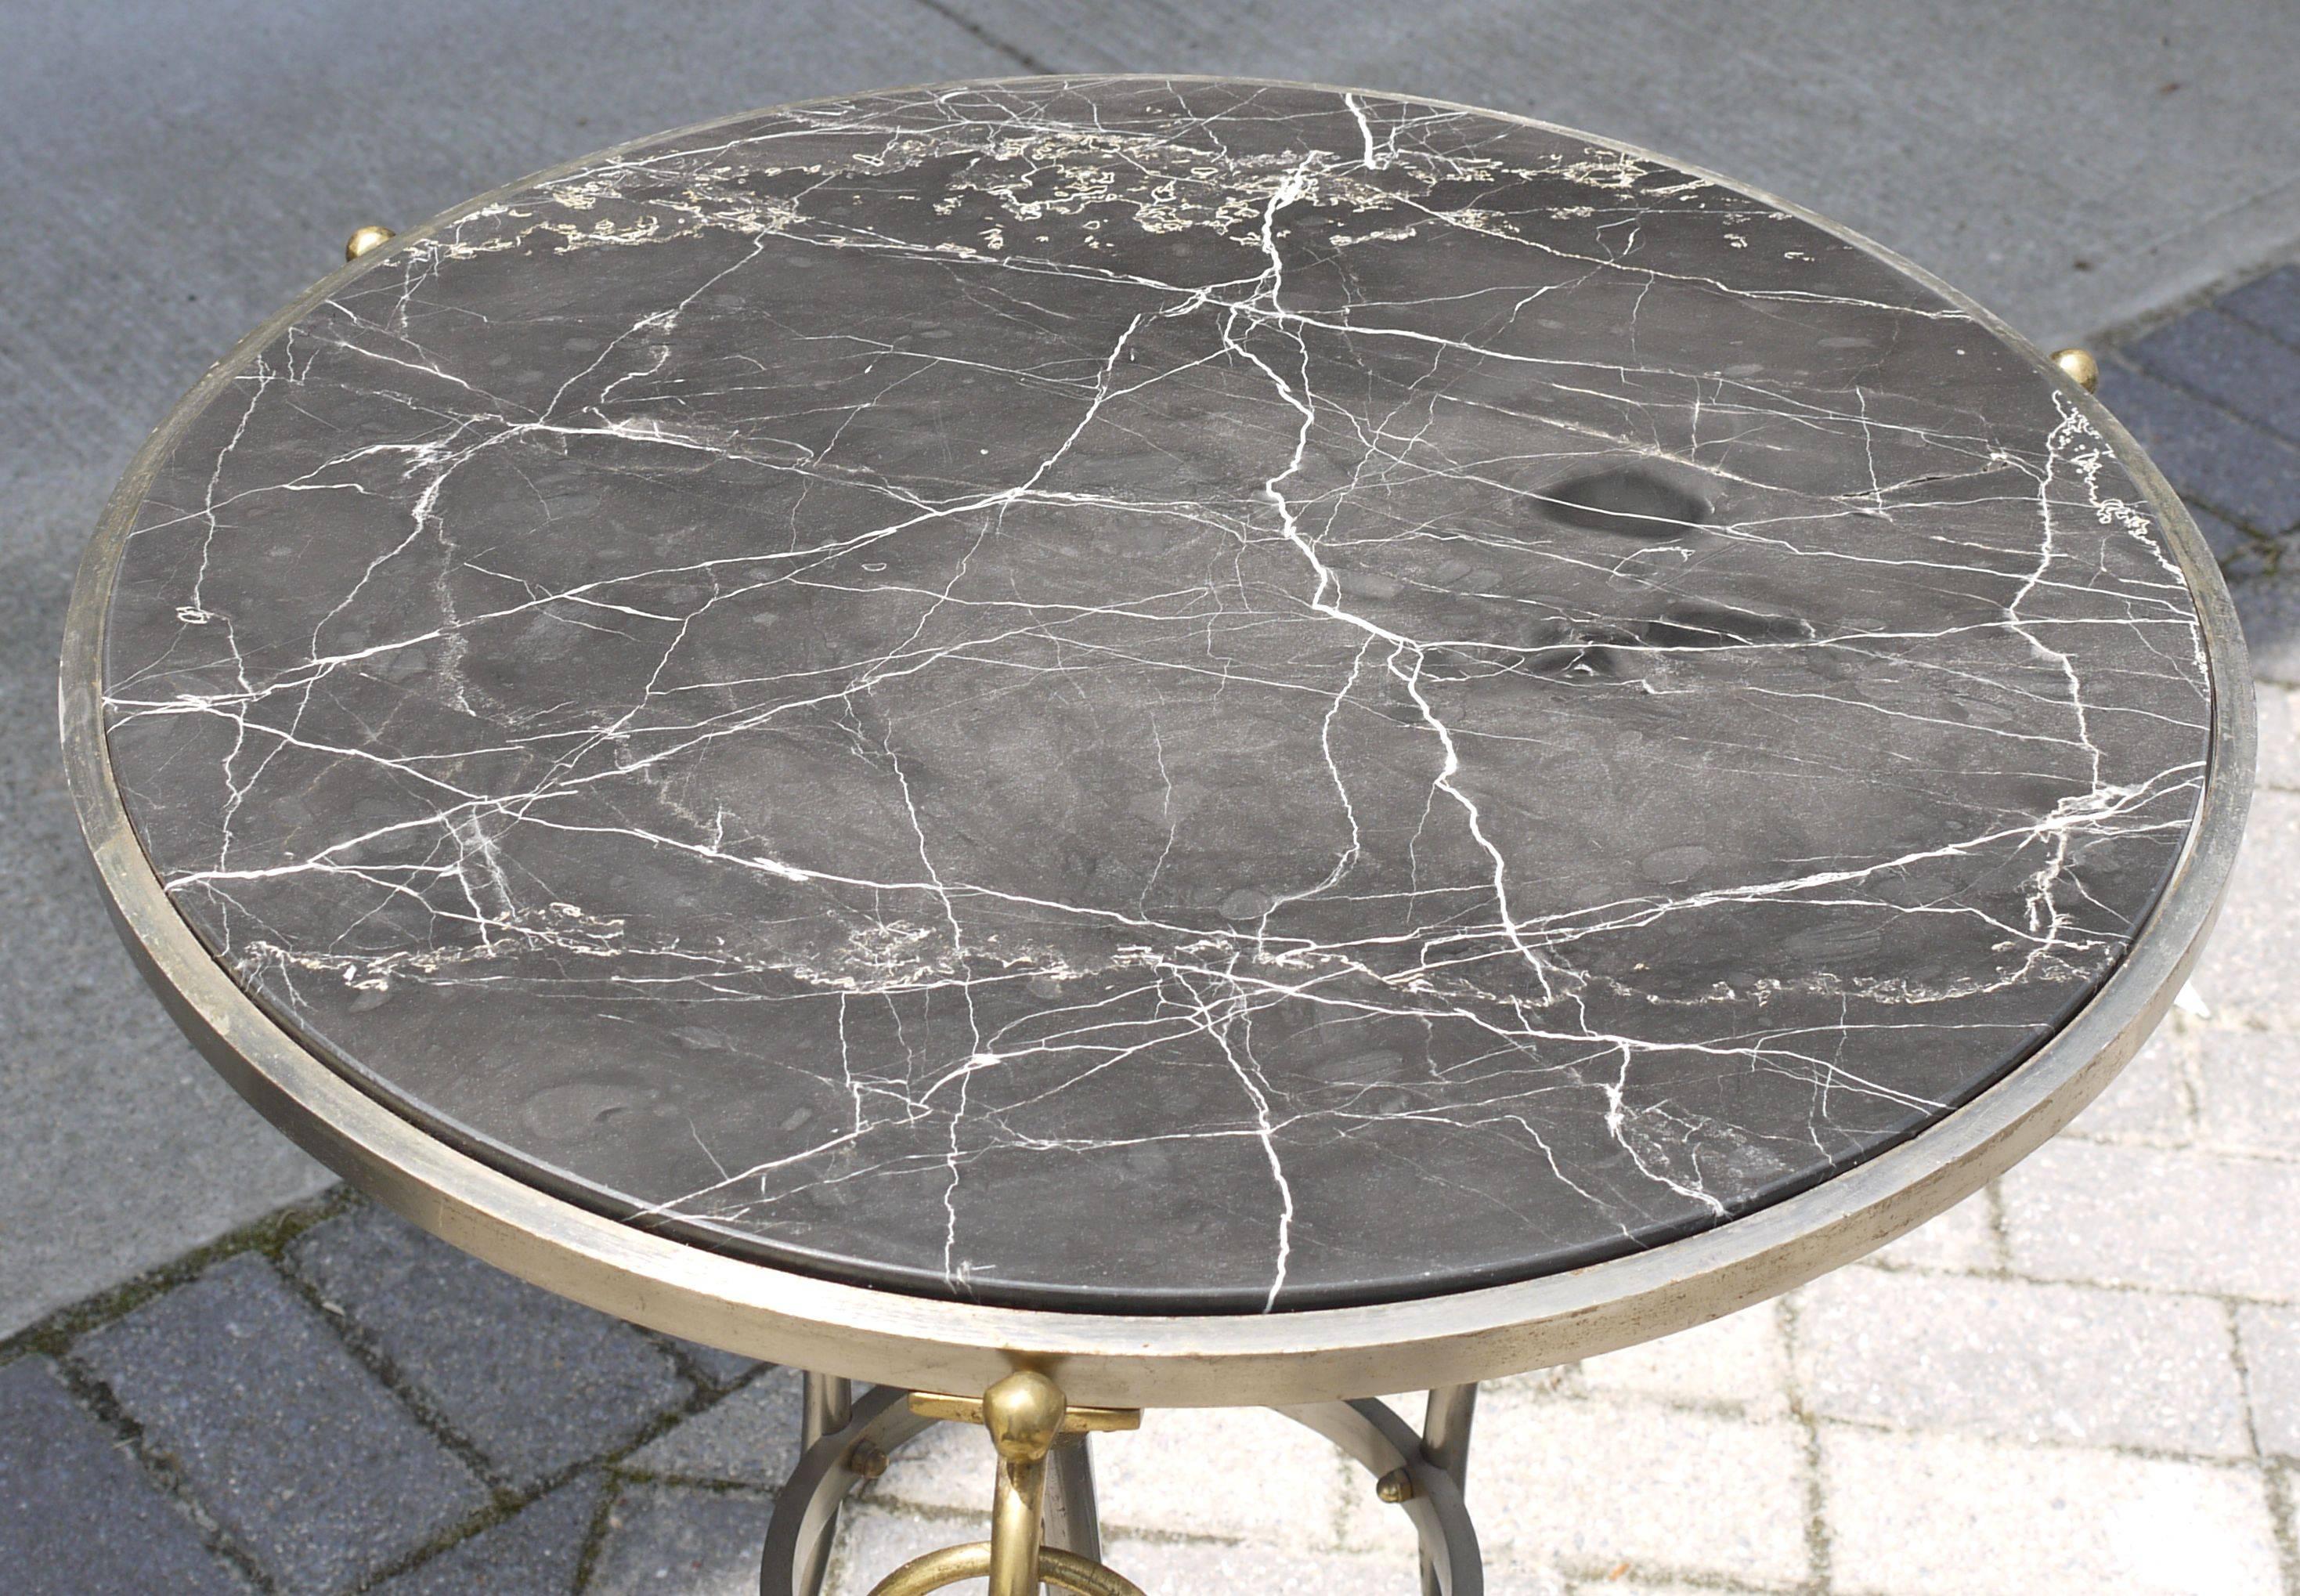 A neoclassical gueridon with nickled brushed steel finish and brass appointments topped with a black marble top that started out life as being polished but through the years has almost become a honed marble. It's the way old marble should look.